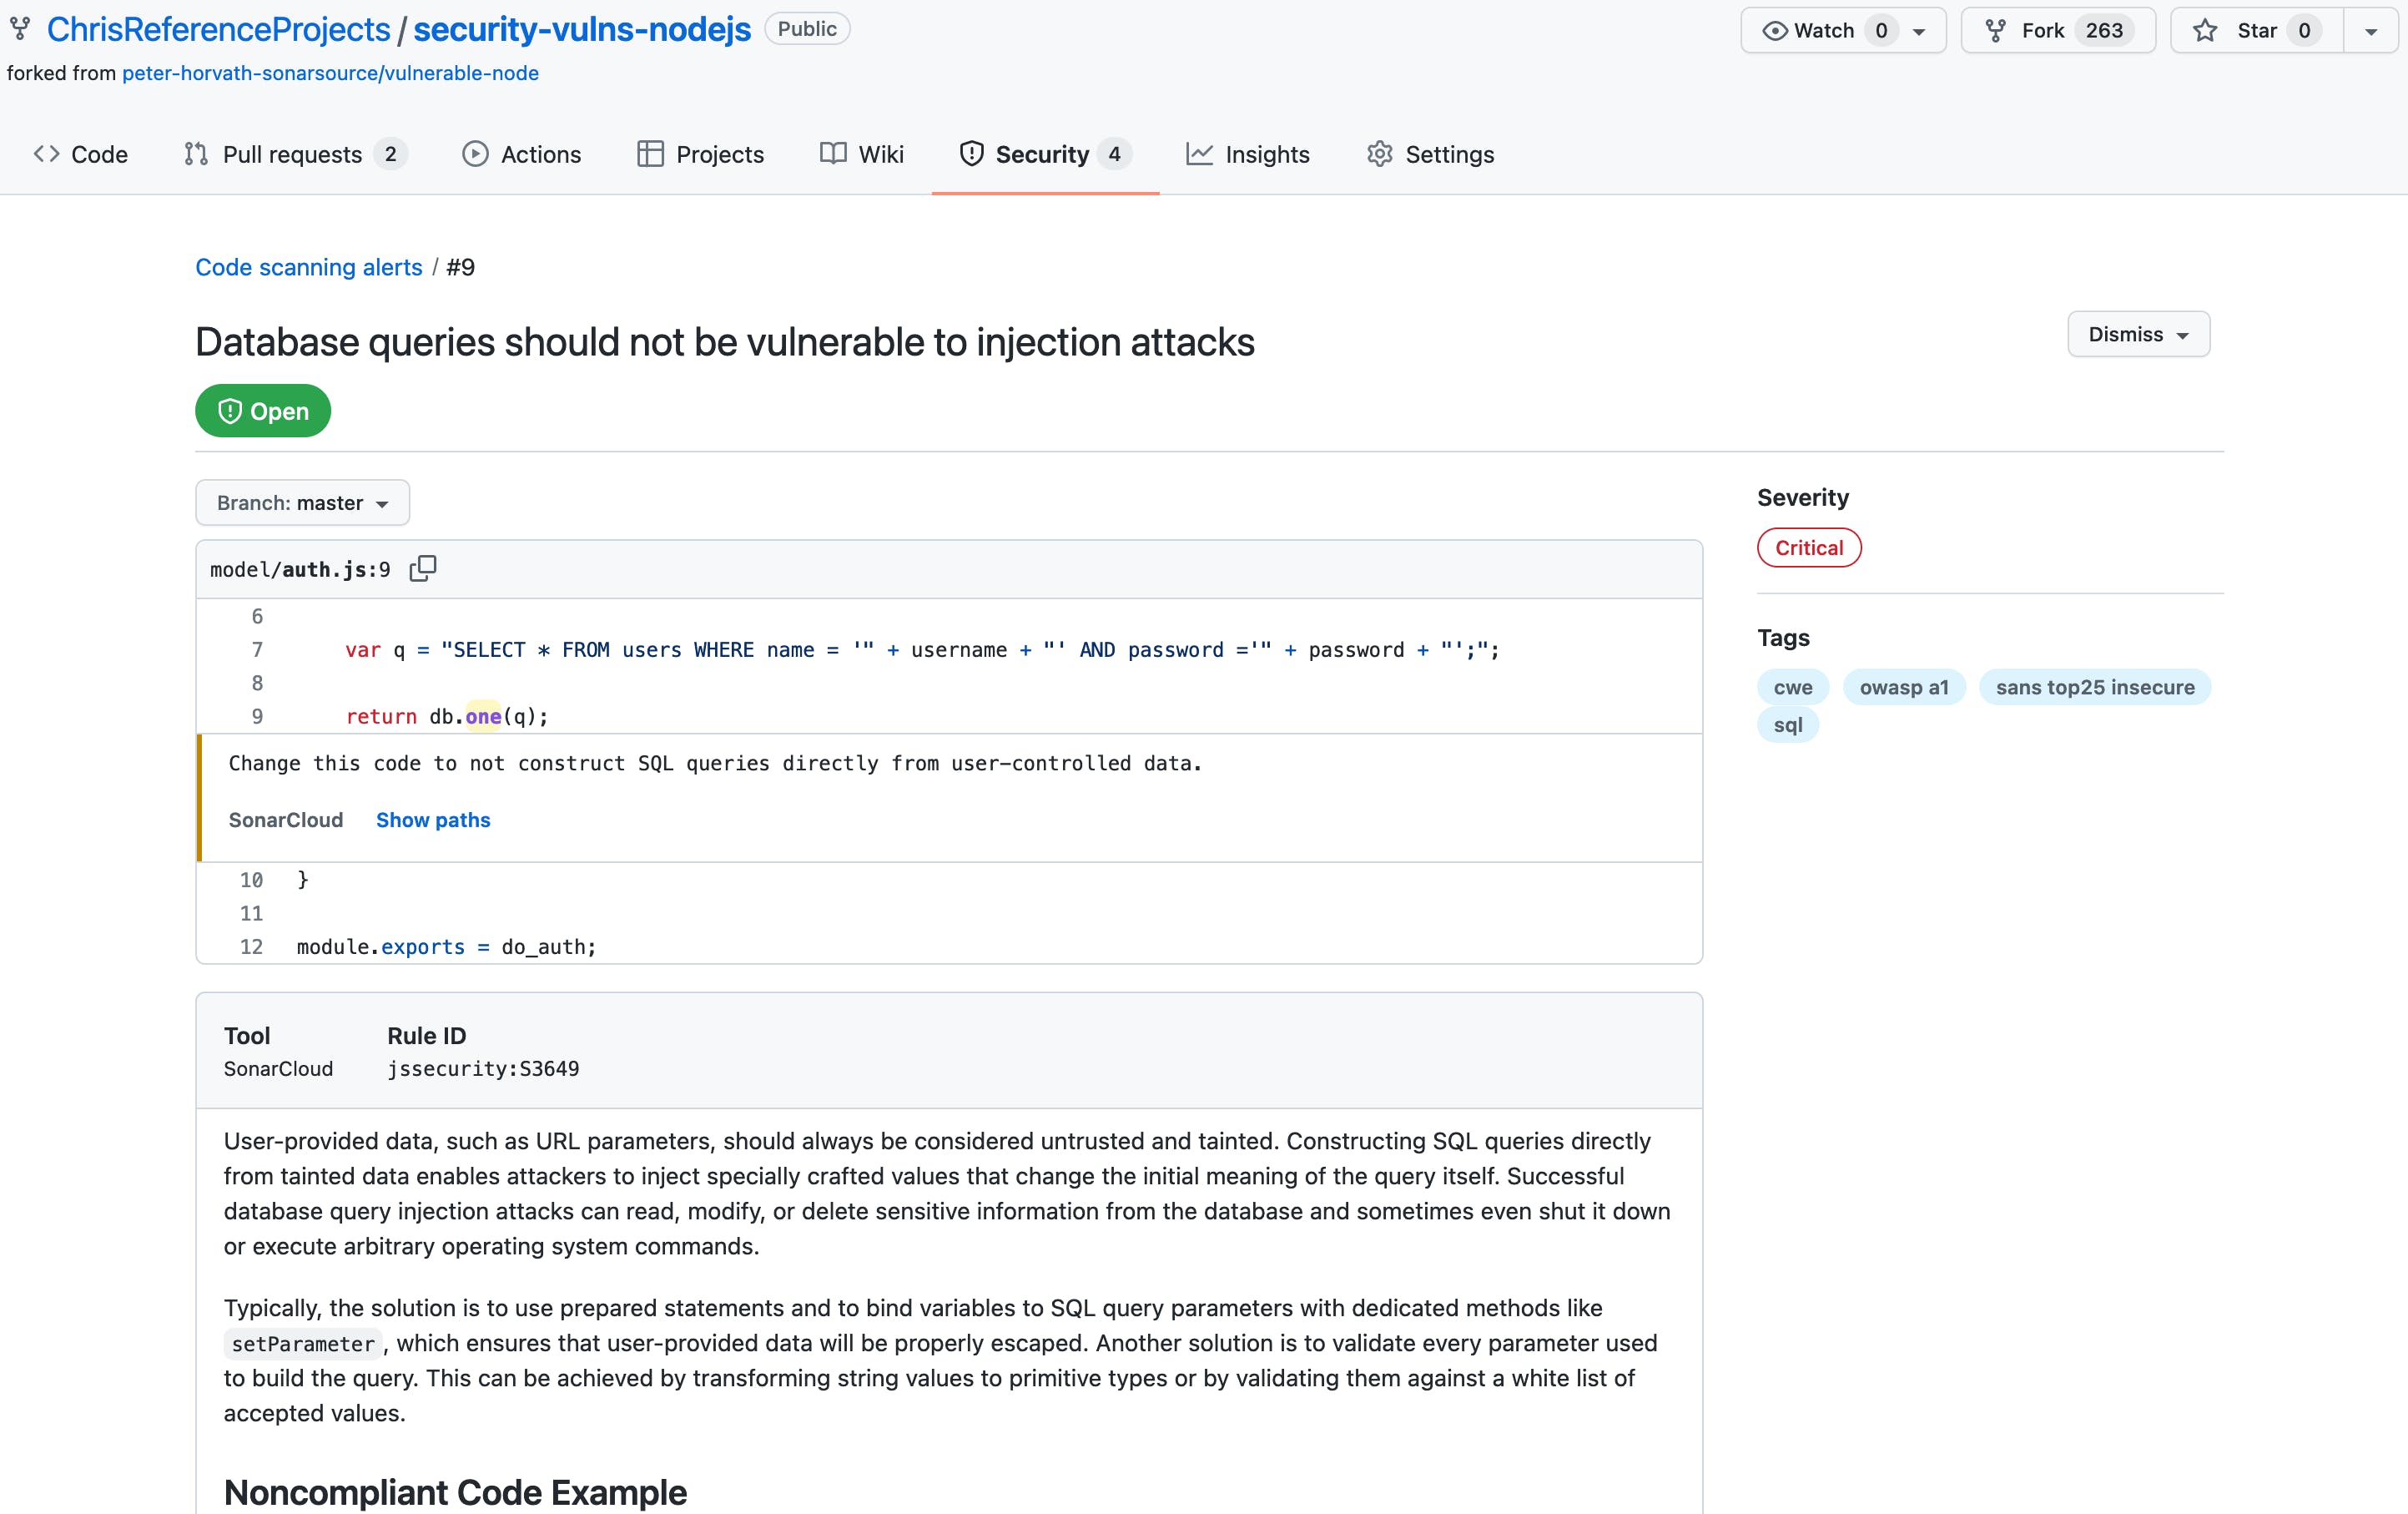 GitHub Repository with Code Scanning for Vulnerabilities.